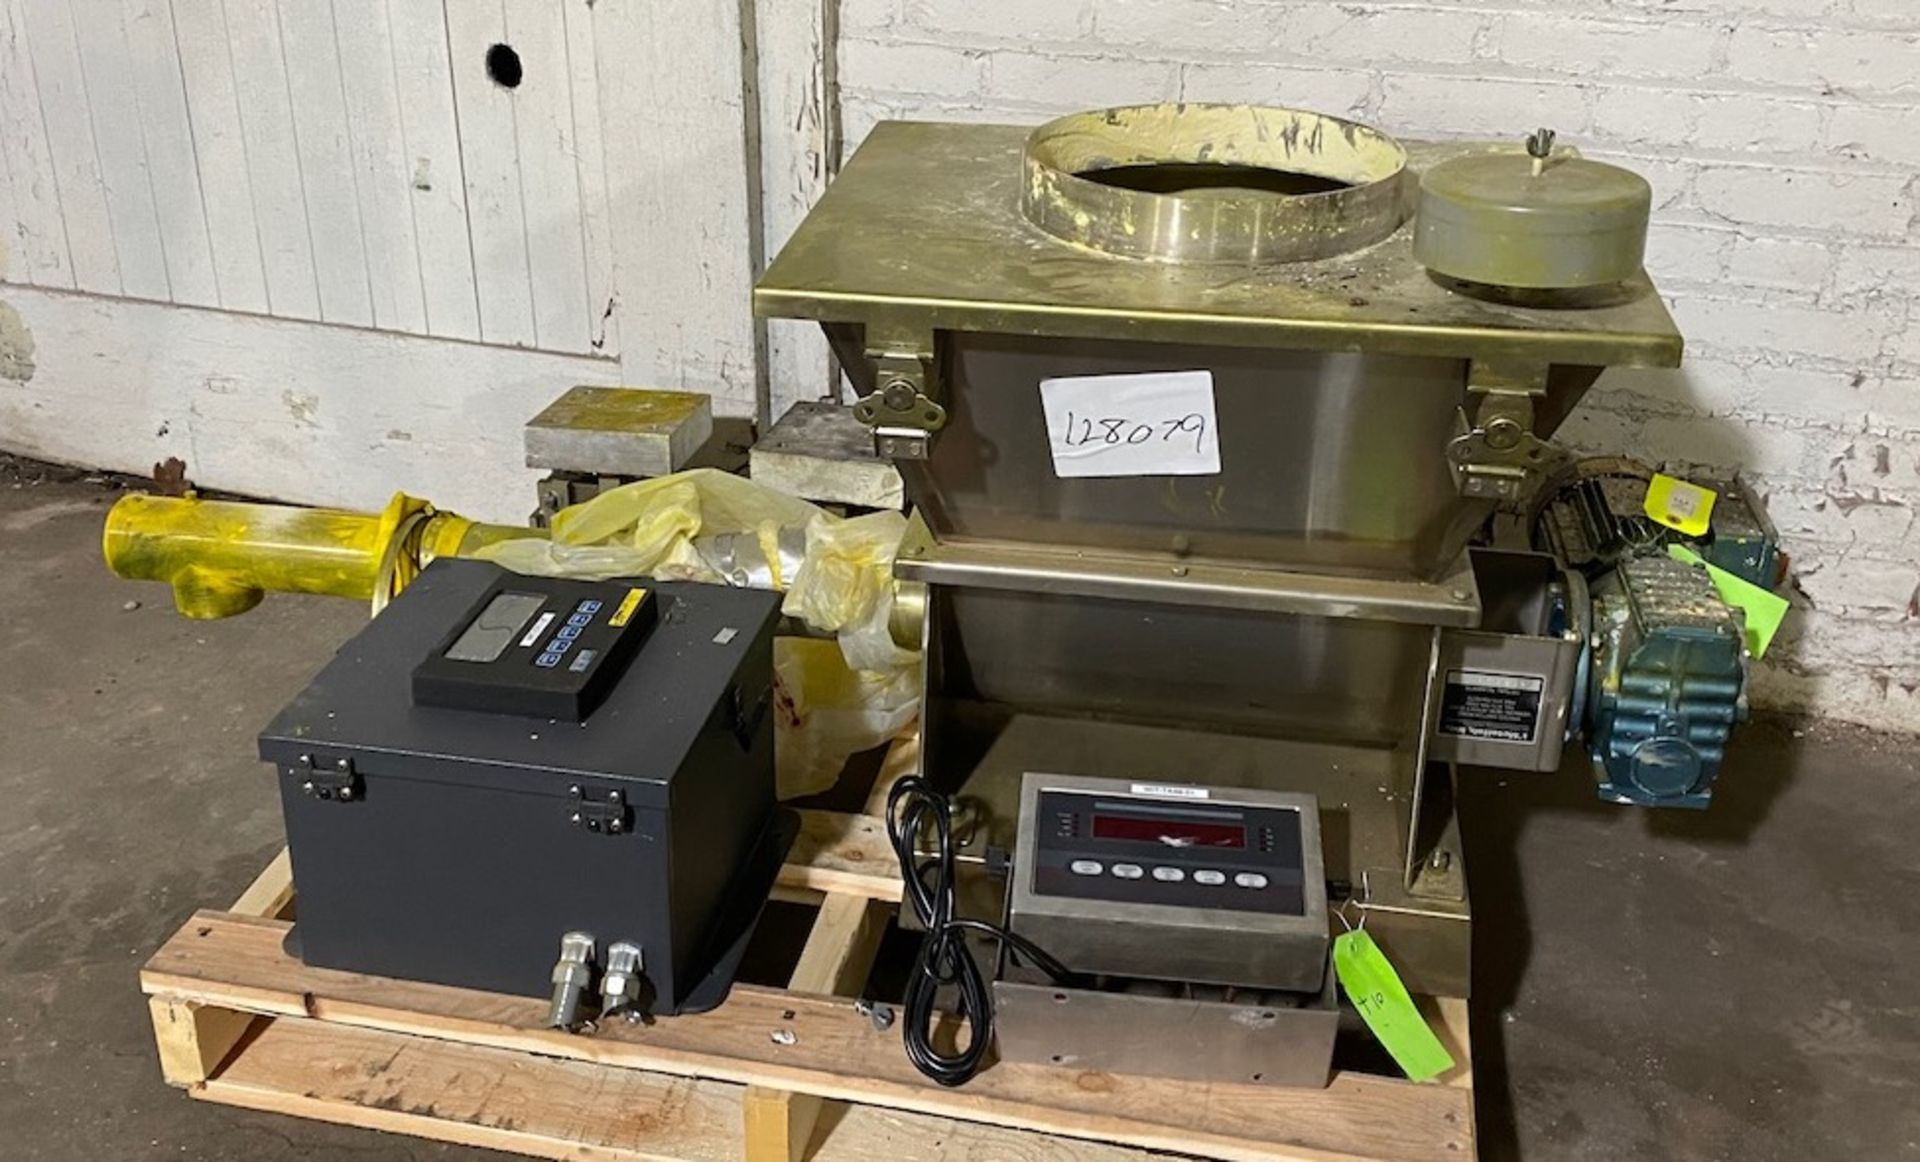 Metalfab Auger Powder Feeder with Rice Lake loadcells and controller. [Ref:128079]